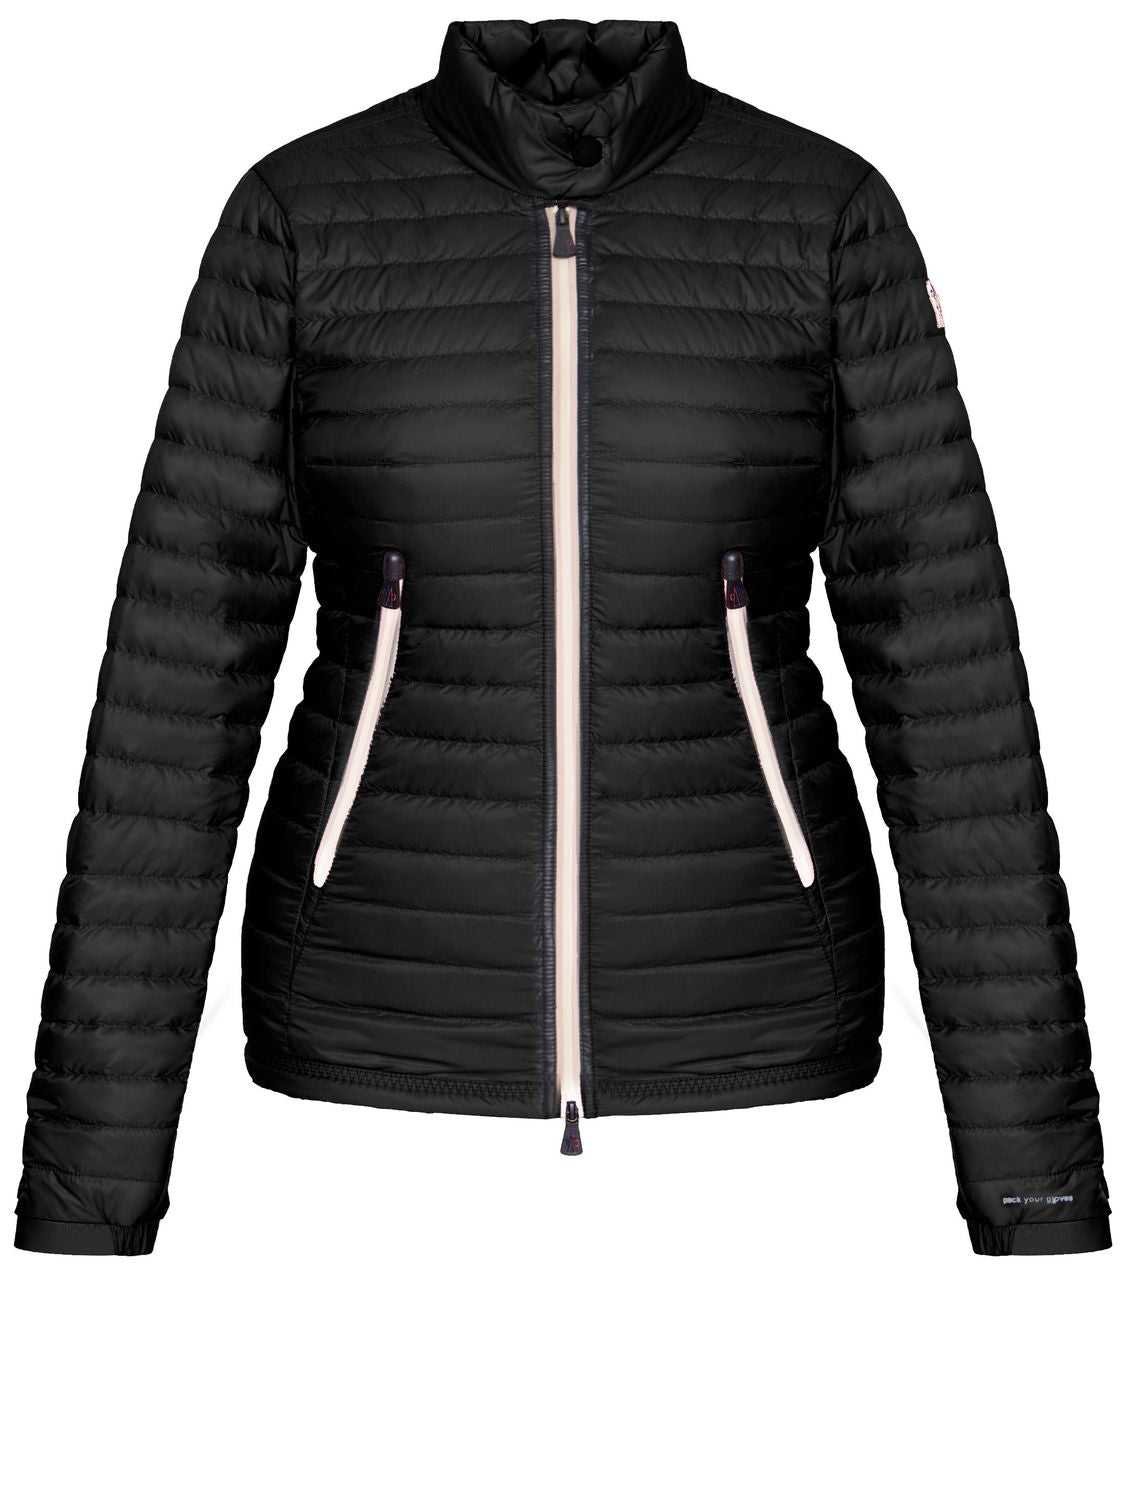 MONCLER GRENOBLE Lightweight Waterproof Jacket for Women - High Collar, Foldable & Iconic Logo Sleeve Patch